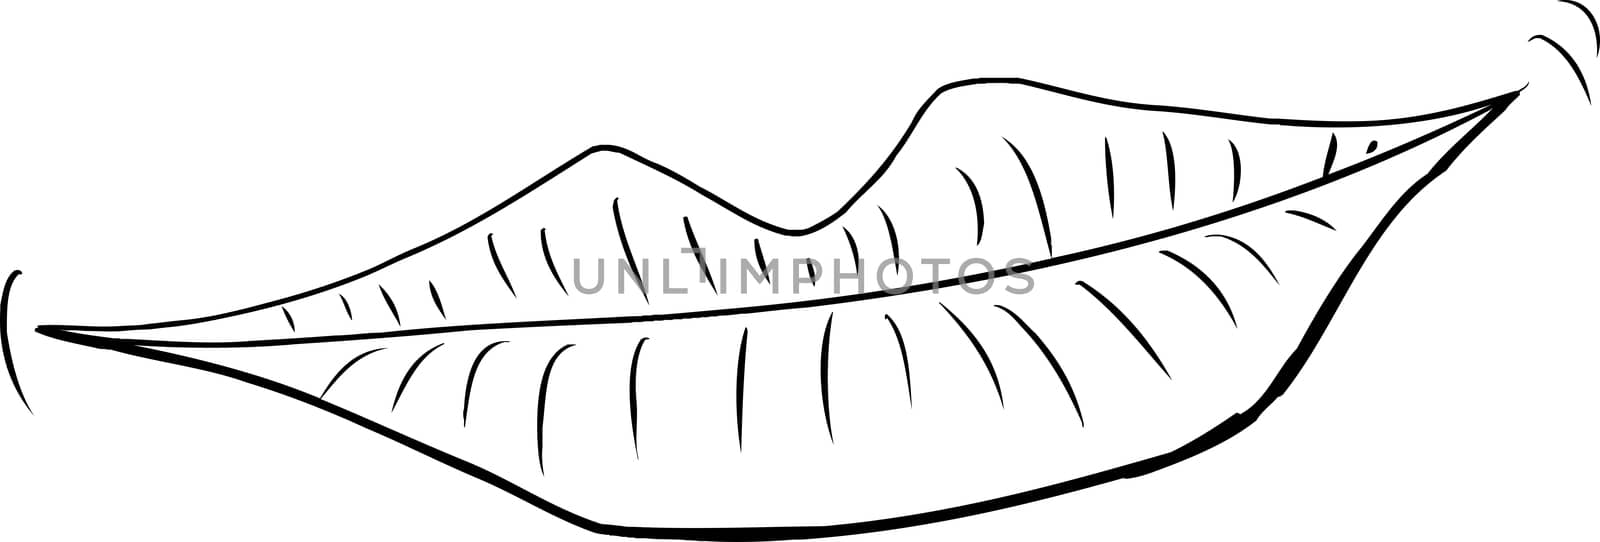 Outlined pair of grinning human lips over white background